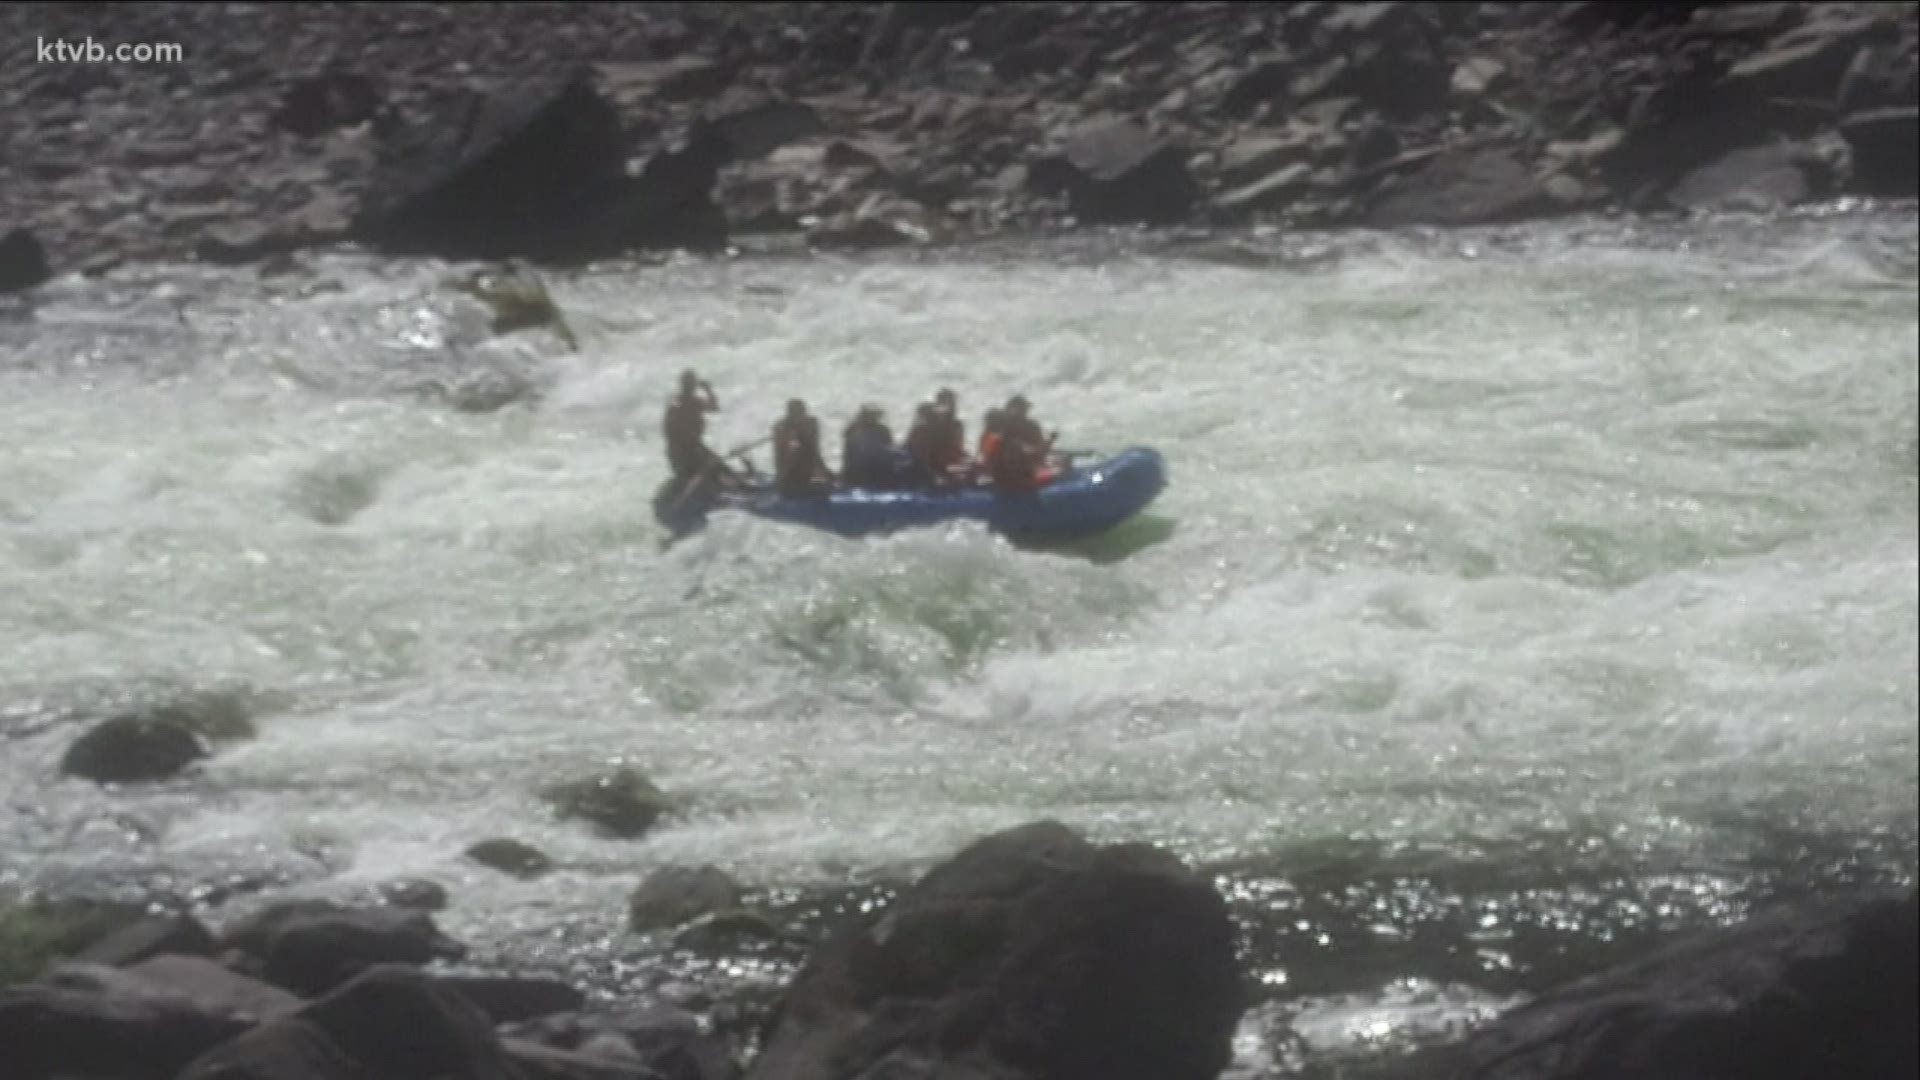 We spoke with owners of two rafting companies to find out how this latest setback is impacting their bottom line.